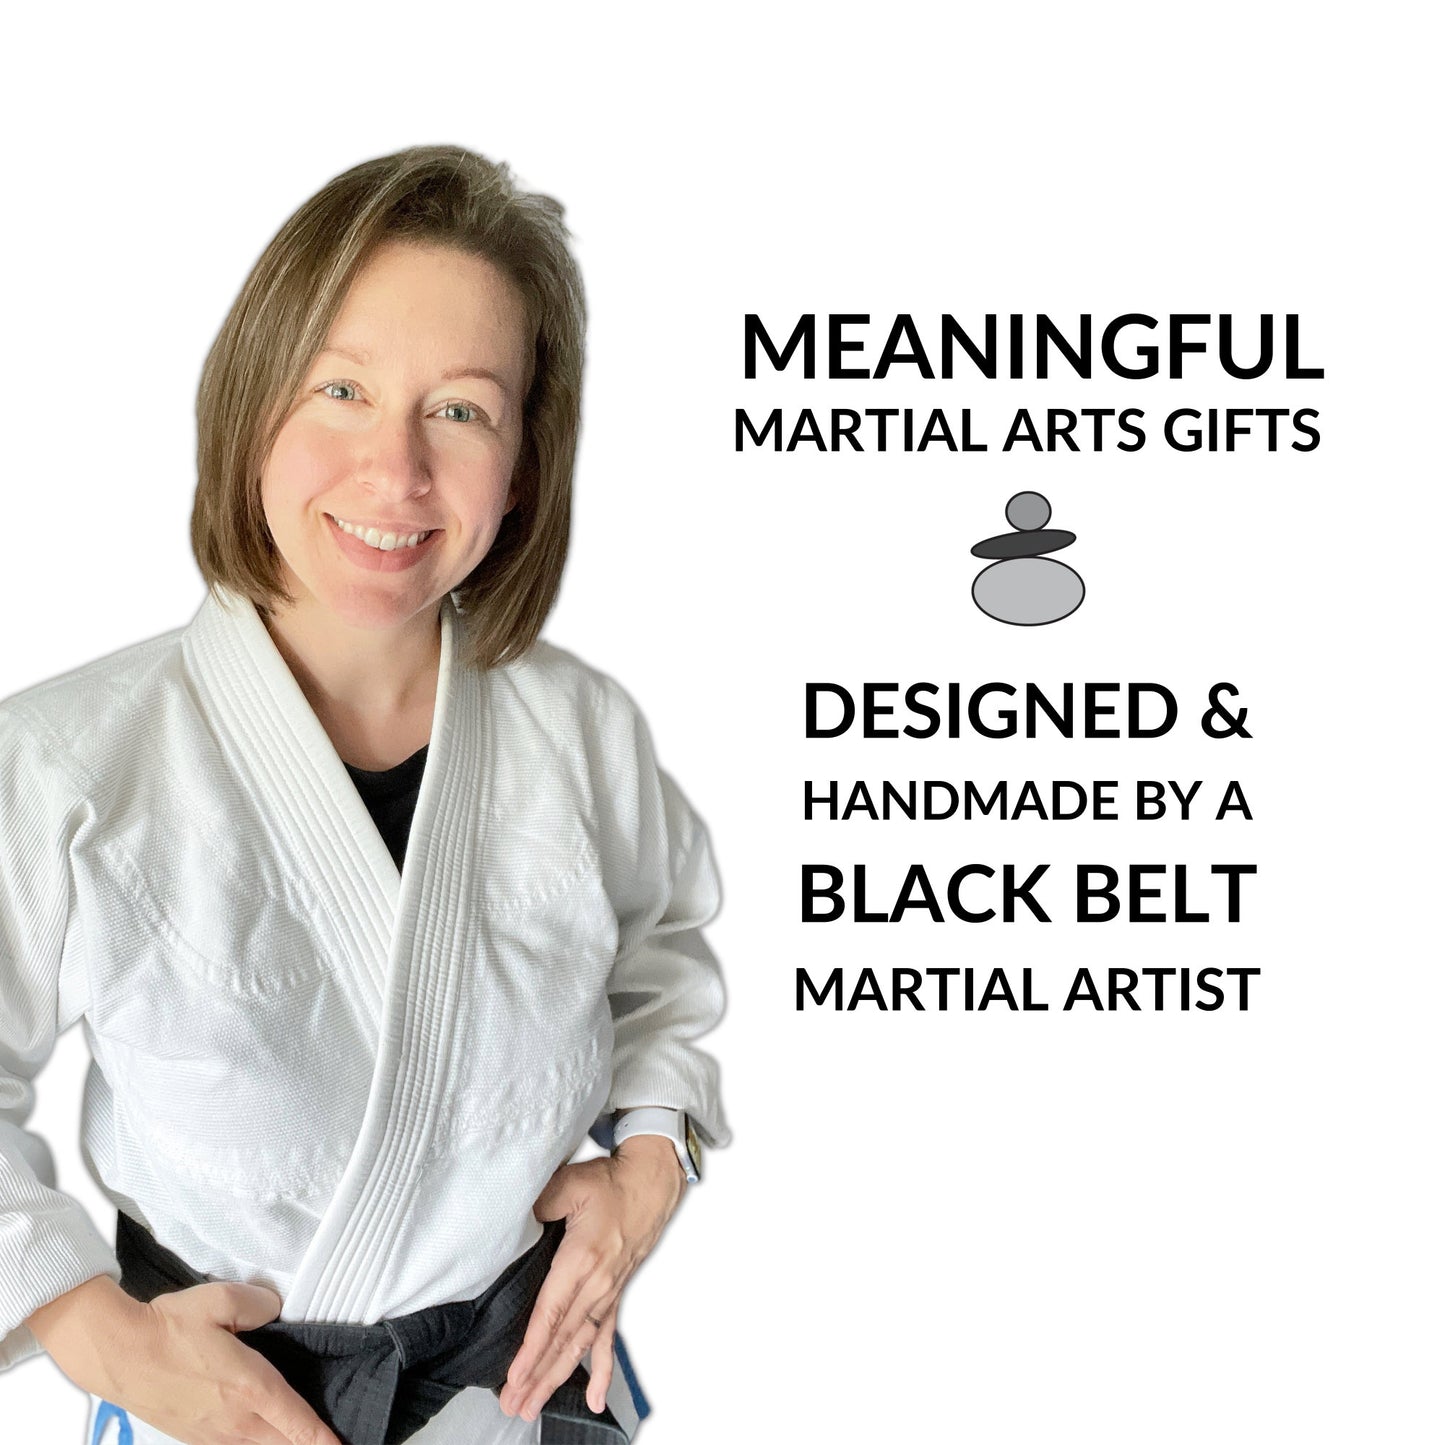 image is of a female in a white martial arts gi and black black. she is smiling and has shoulder length brunette hair.